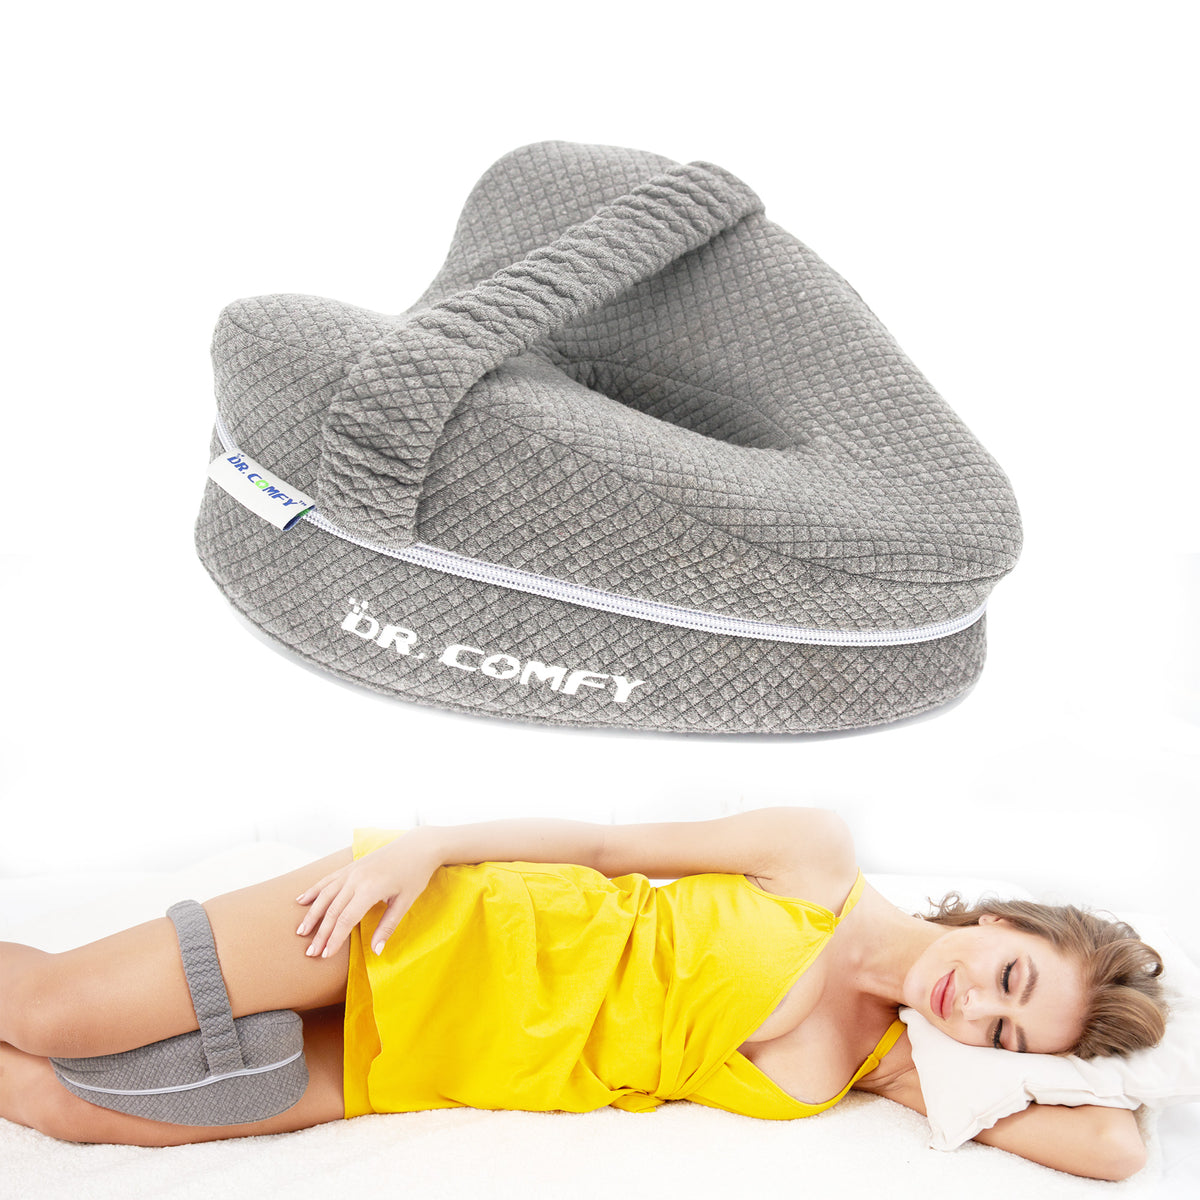 Dr. Pillow Leg Pillow - Adjusts Your Hips, Legs And Spine For A